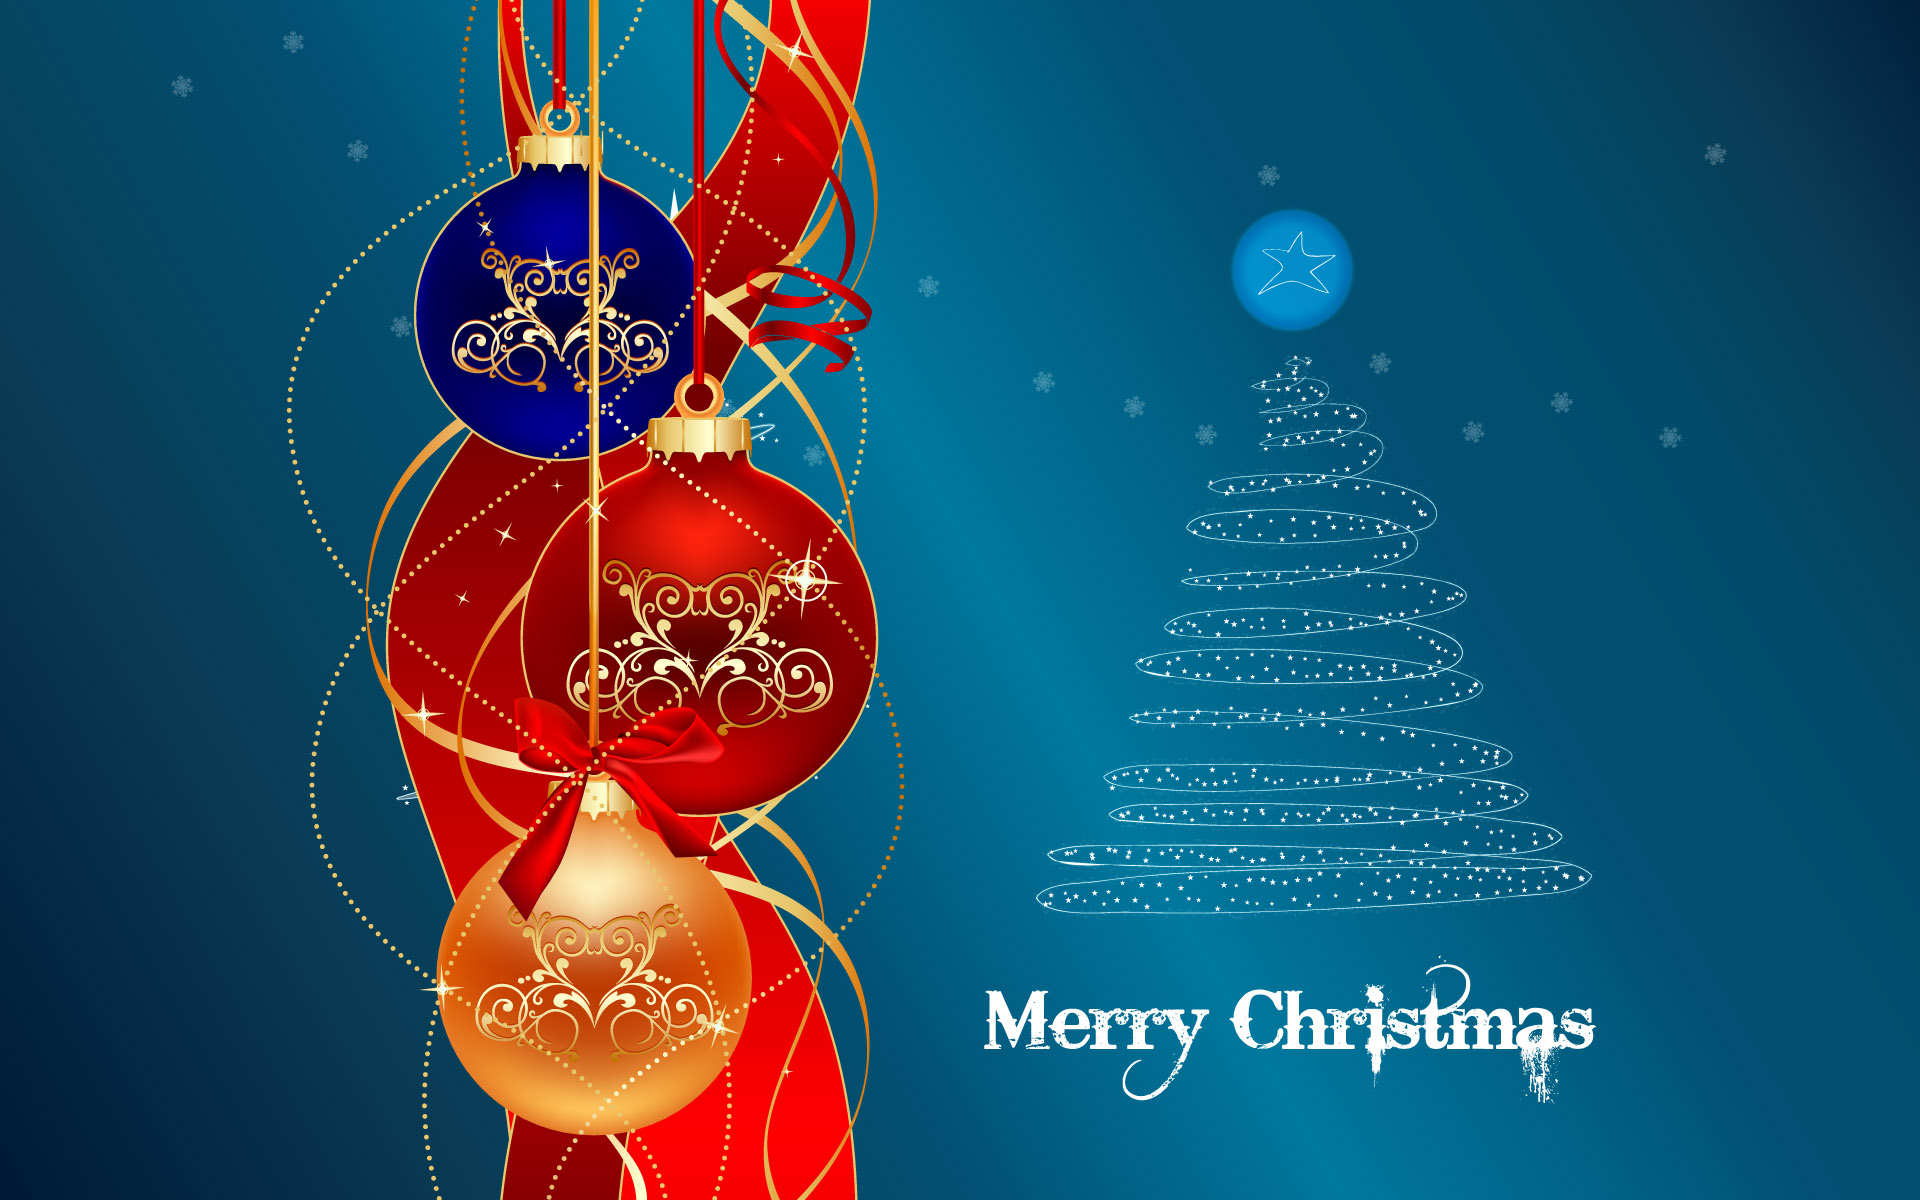 Mas Tree Merry Christmas Wallpaper With Decorated In